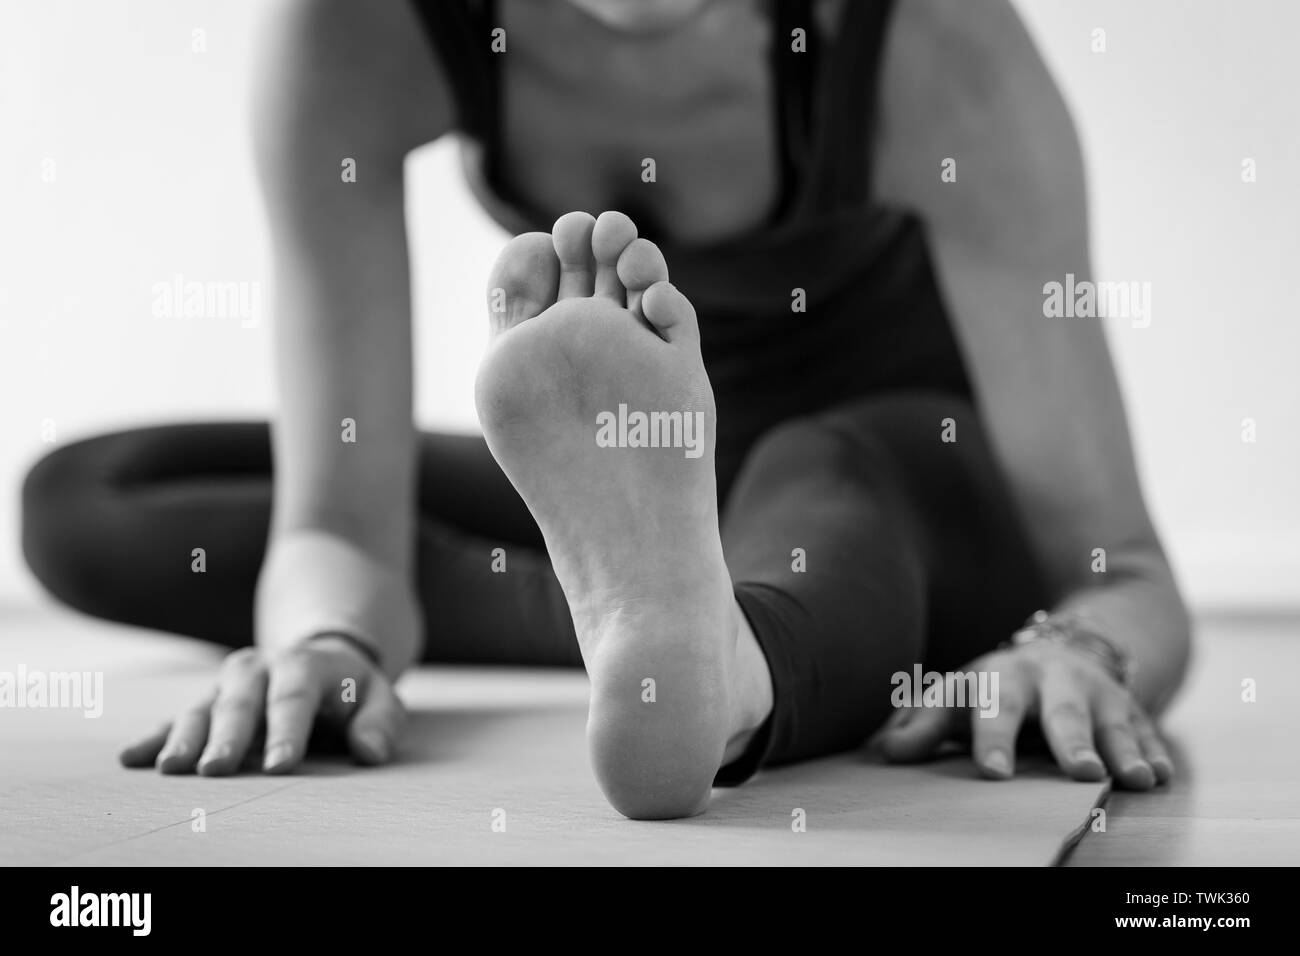 Unrecognizable European woman on the floor on her way to Janu Sirsasana or Head-to-Knee Forward Bend, aka seated yoga pose. Black and white horizontal Stock Photo